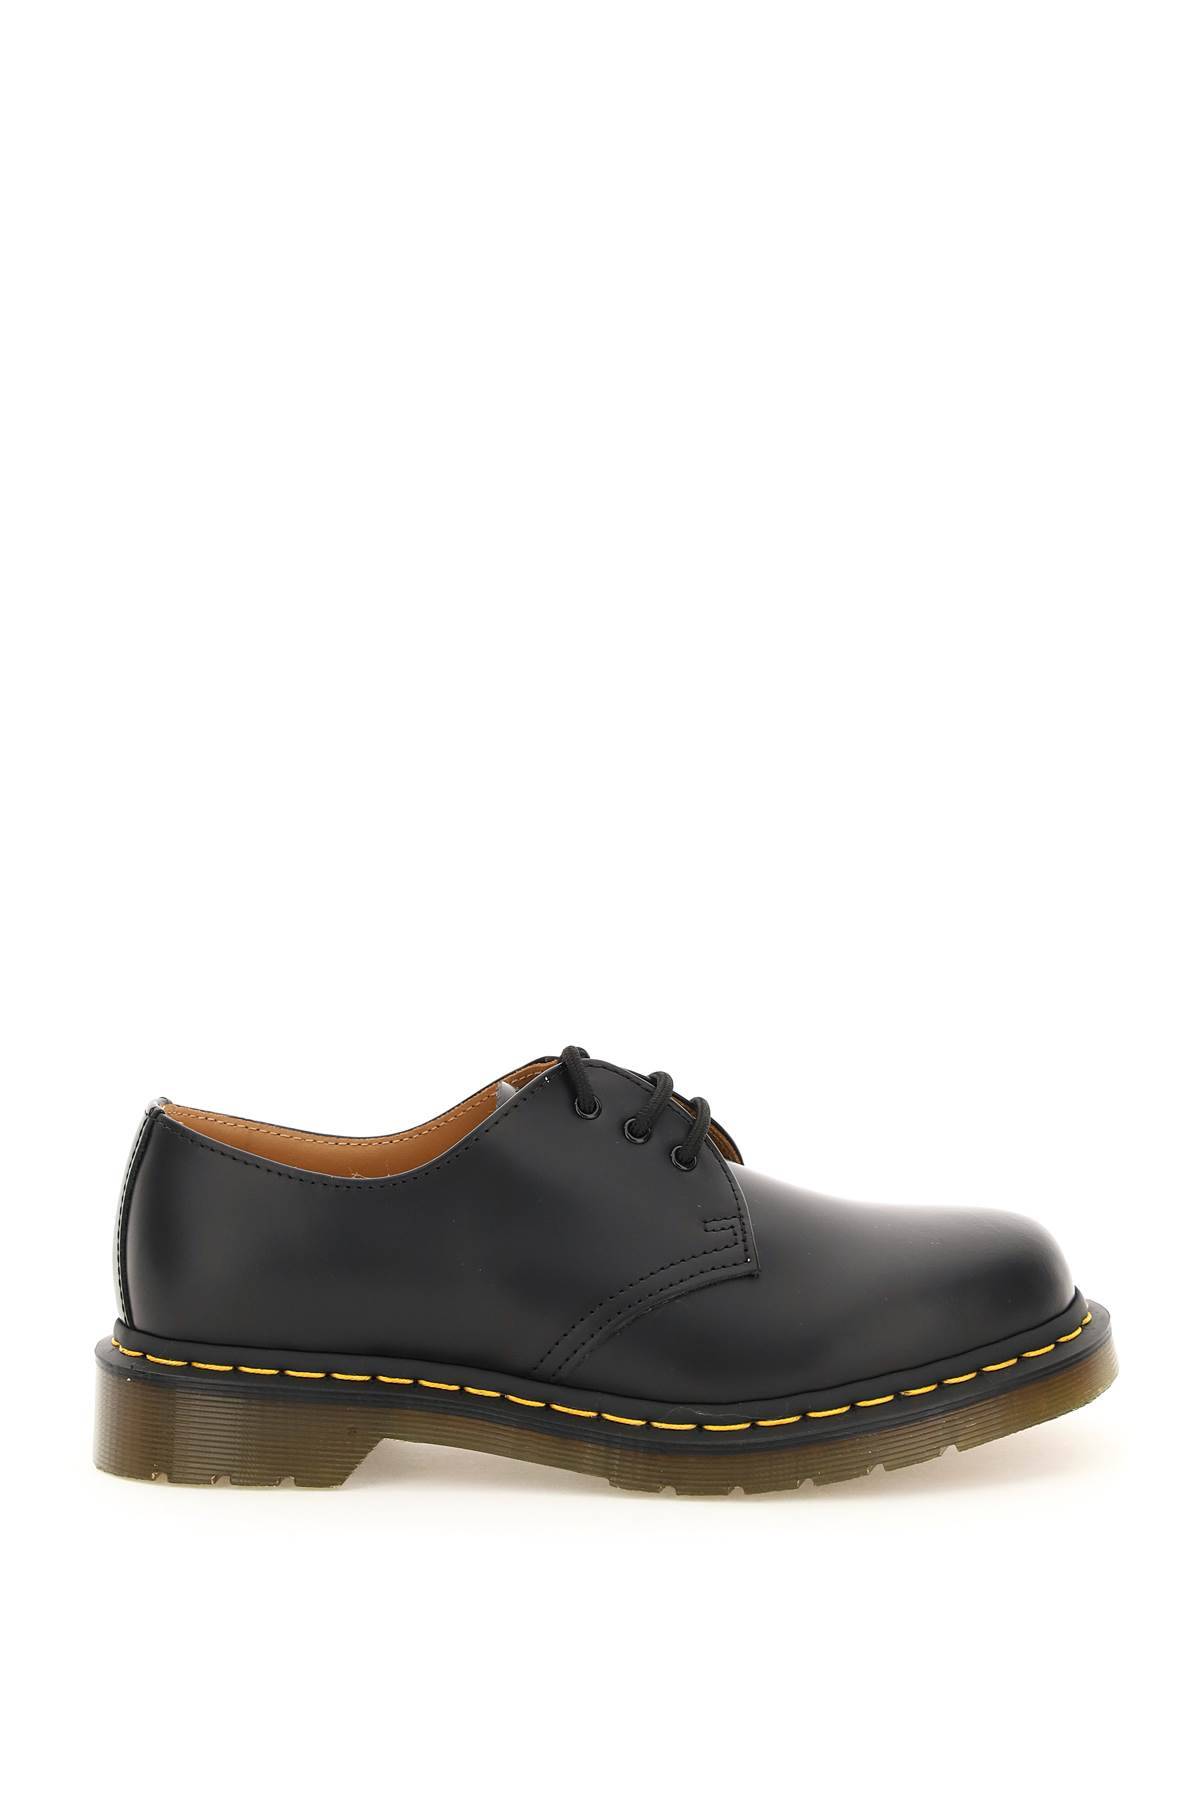 DR.MARTENS DR. MARTENS 1461 smooth lace-up shoes